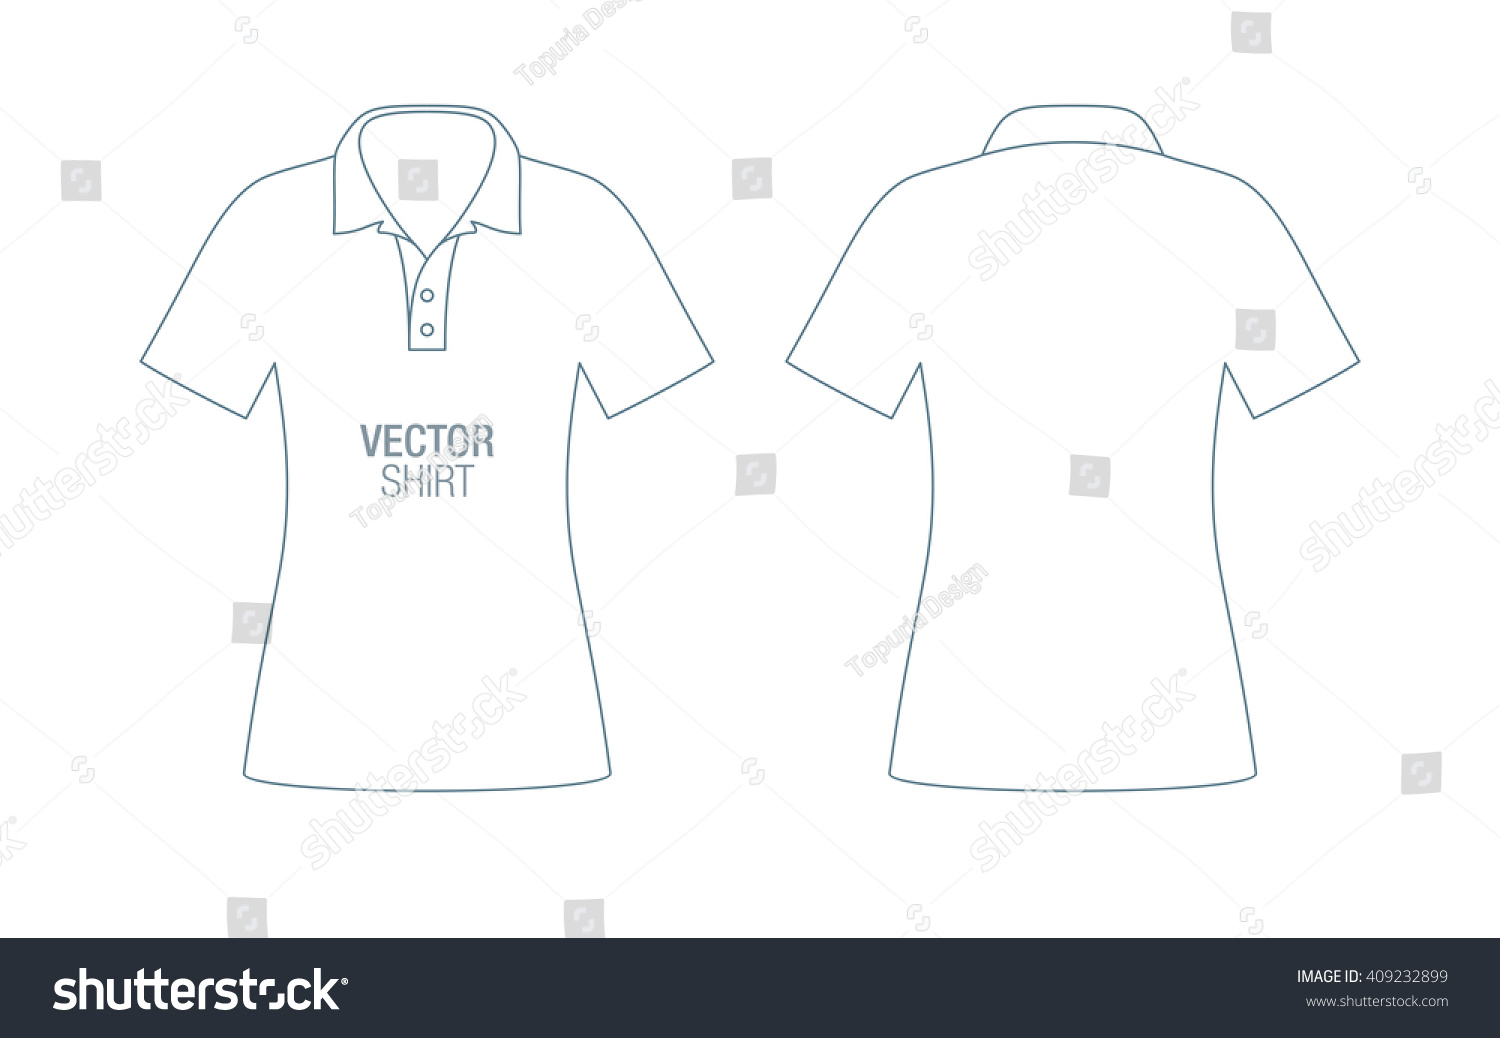 Download Free Download Vector Polo T Shirt Template - Prism ...